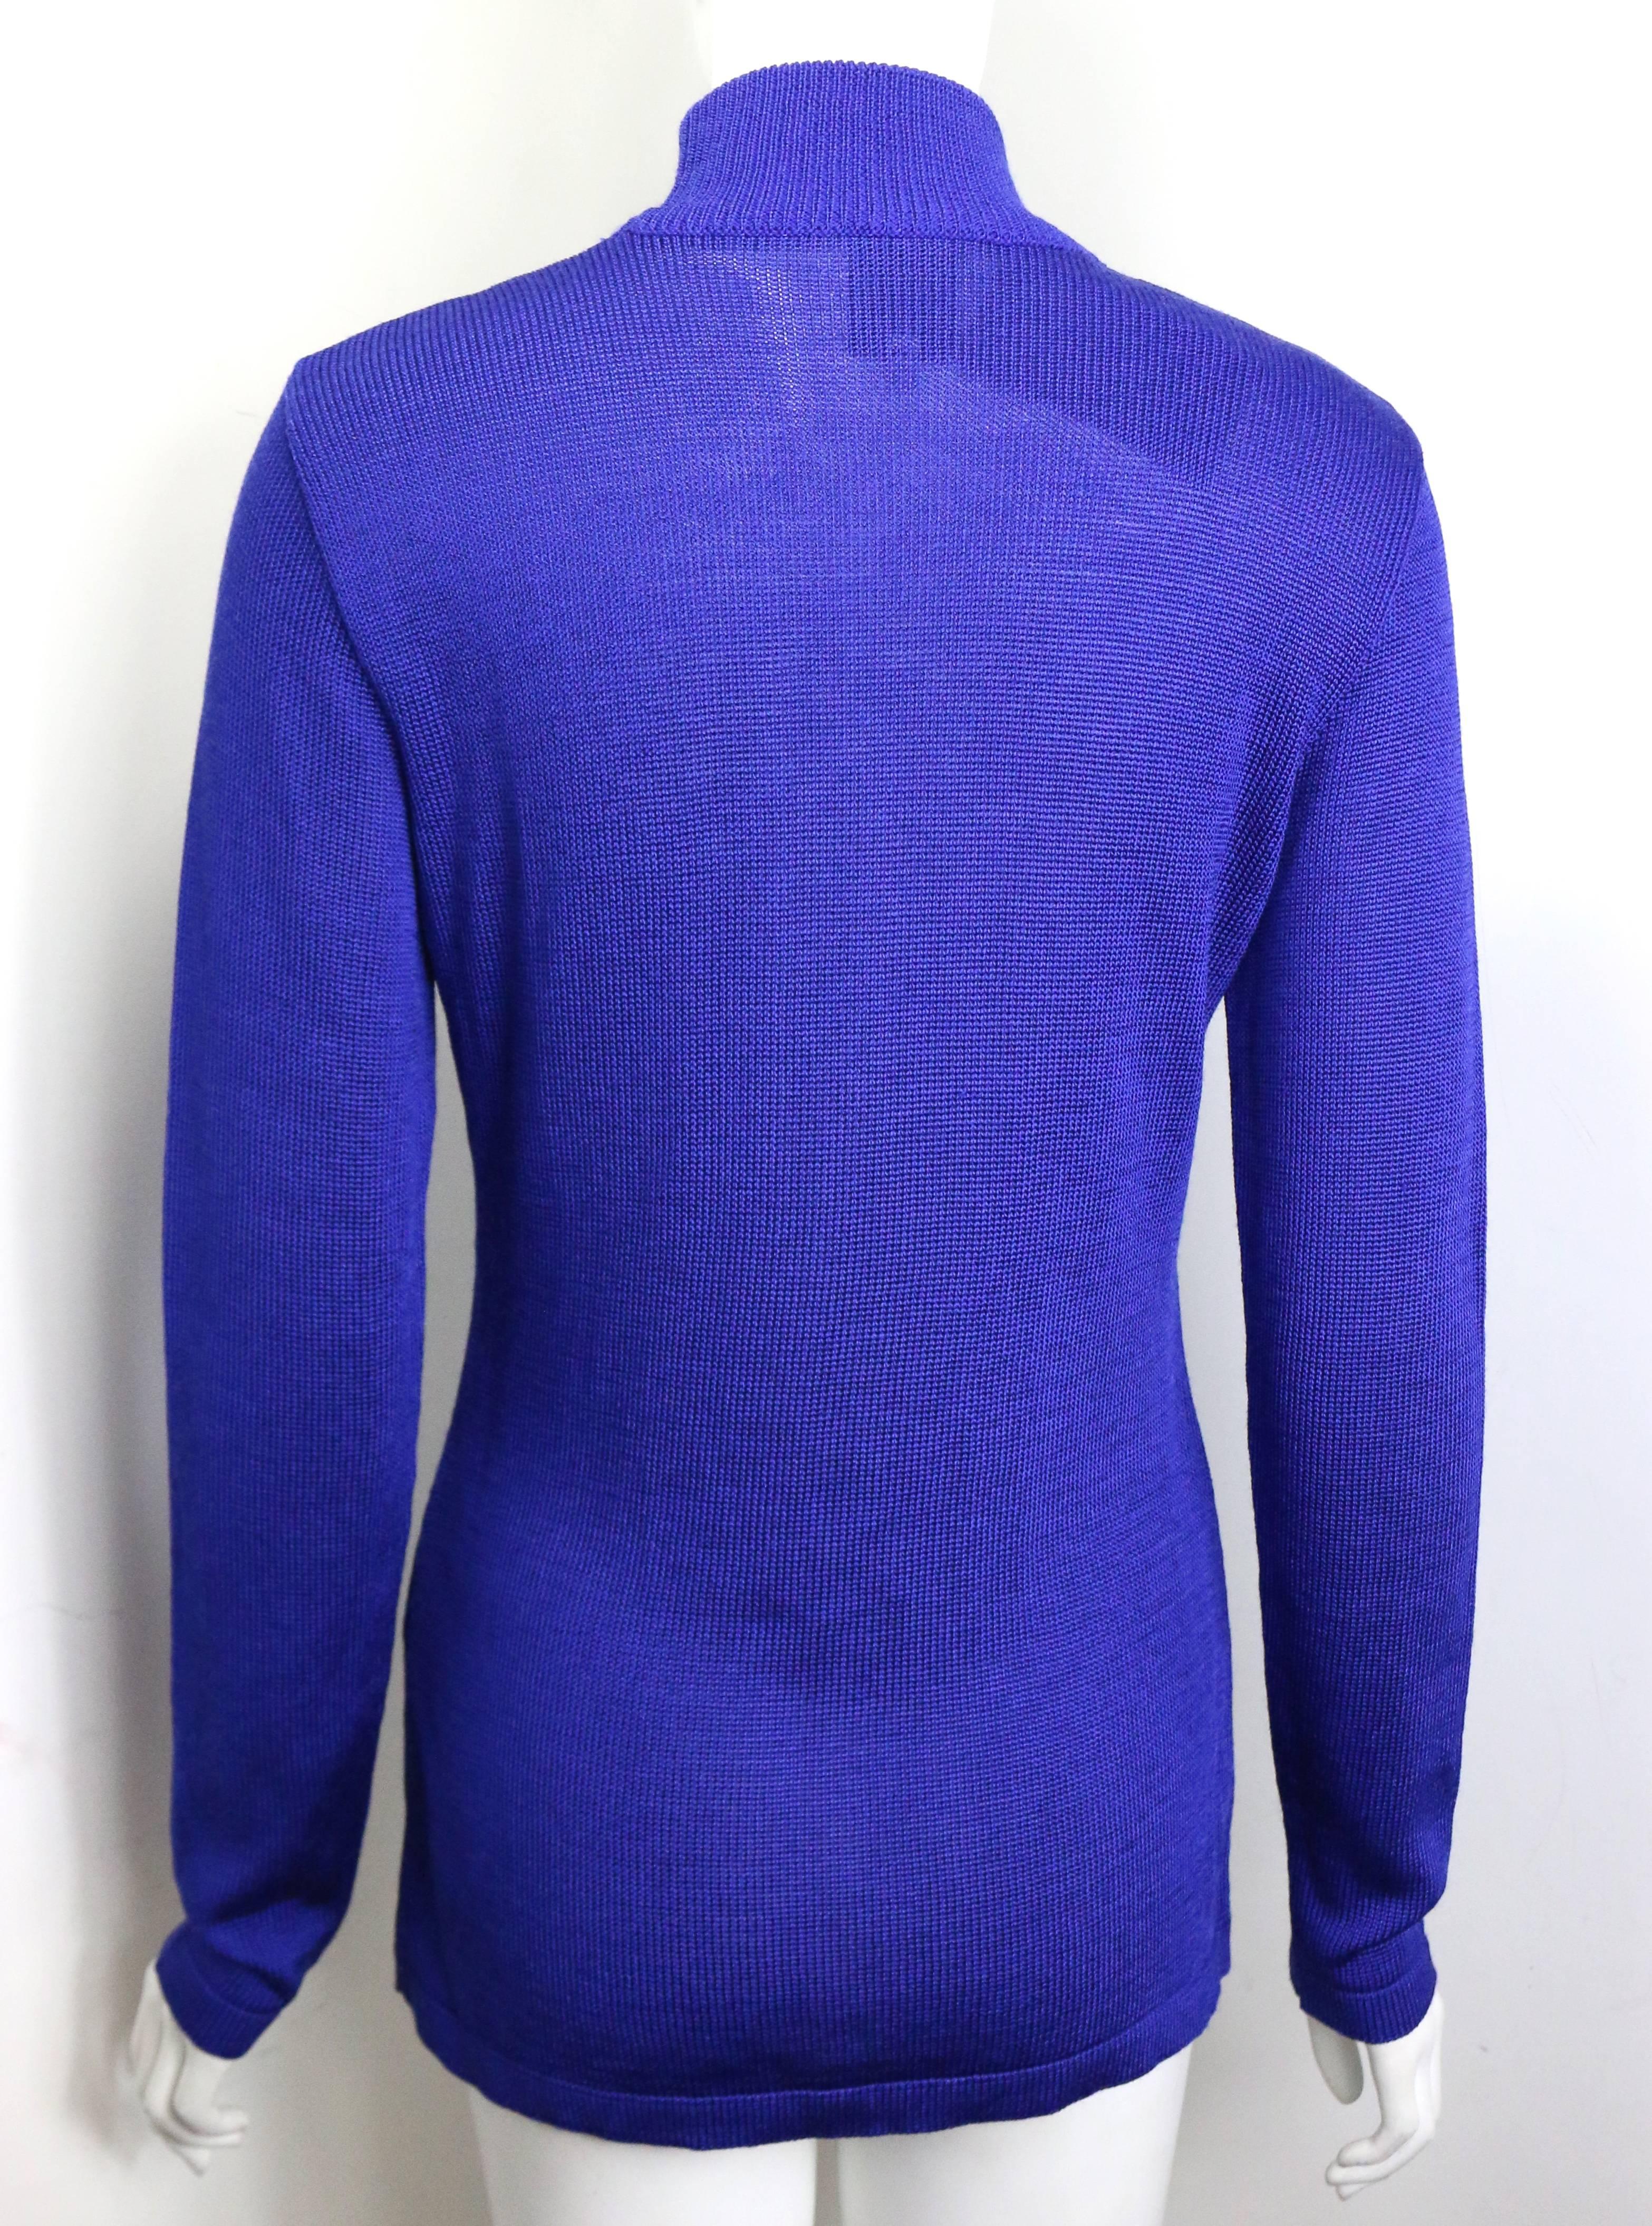 - Vintage 80s Claude Montana blue wool high neck pullover sweater with vertical patent leather trim in front. 

- Size 40. 

- Height: 26.25 inches. Sleeve: 25 inches. Bust: 28 inches. 

- - 60% Rayon, 40% Wool. 